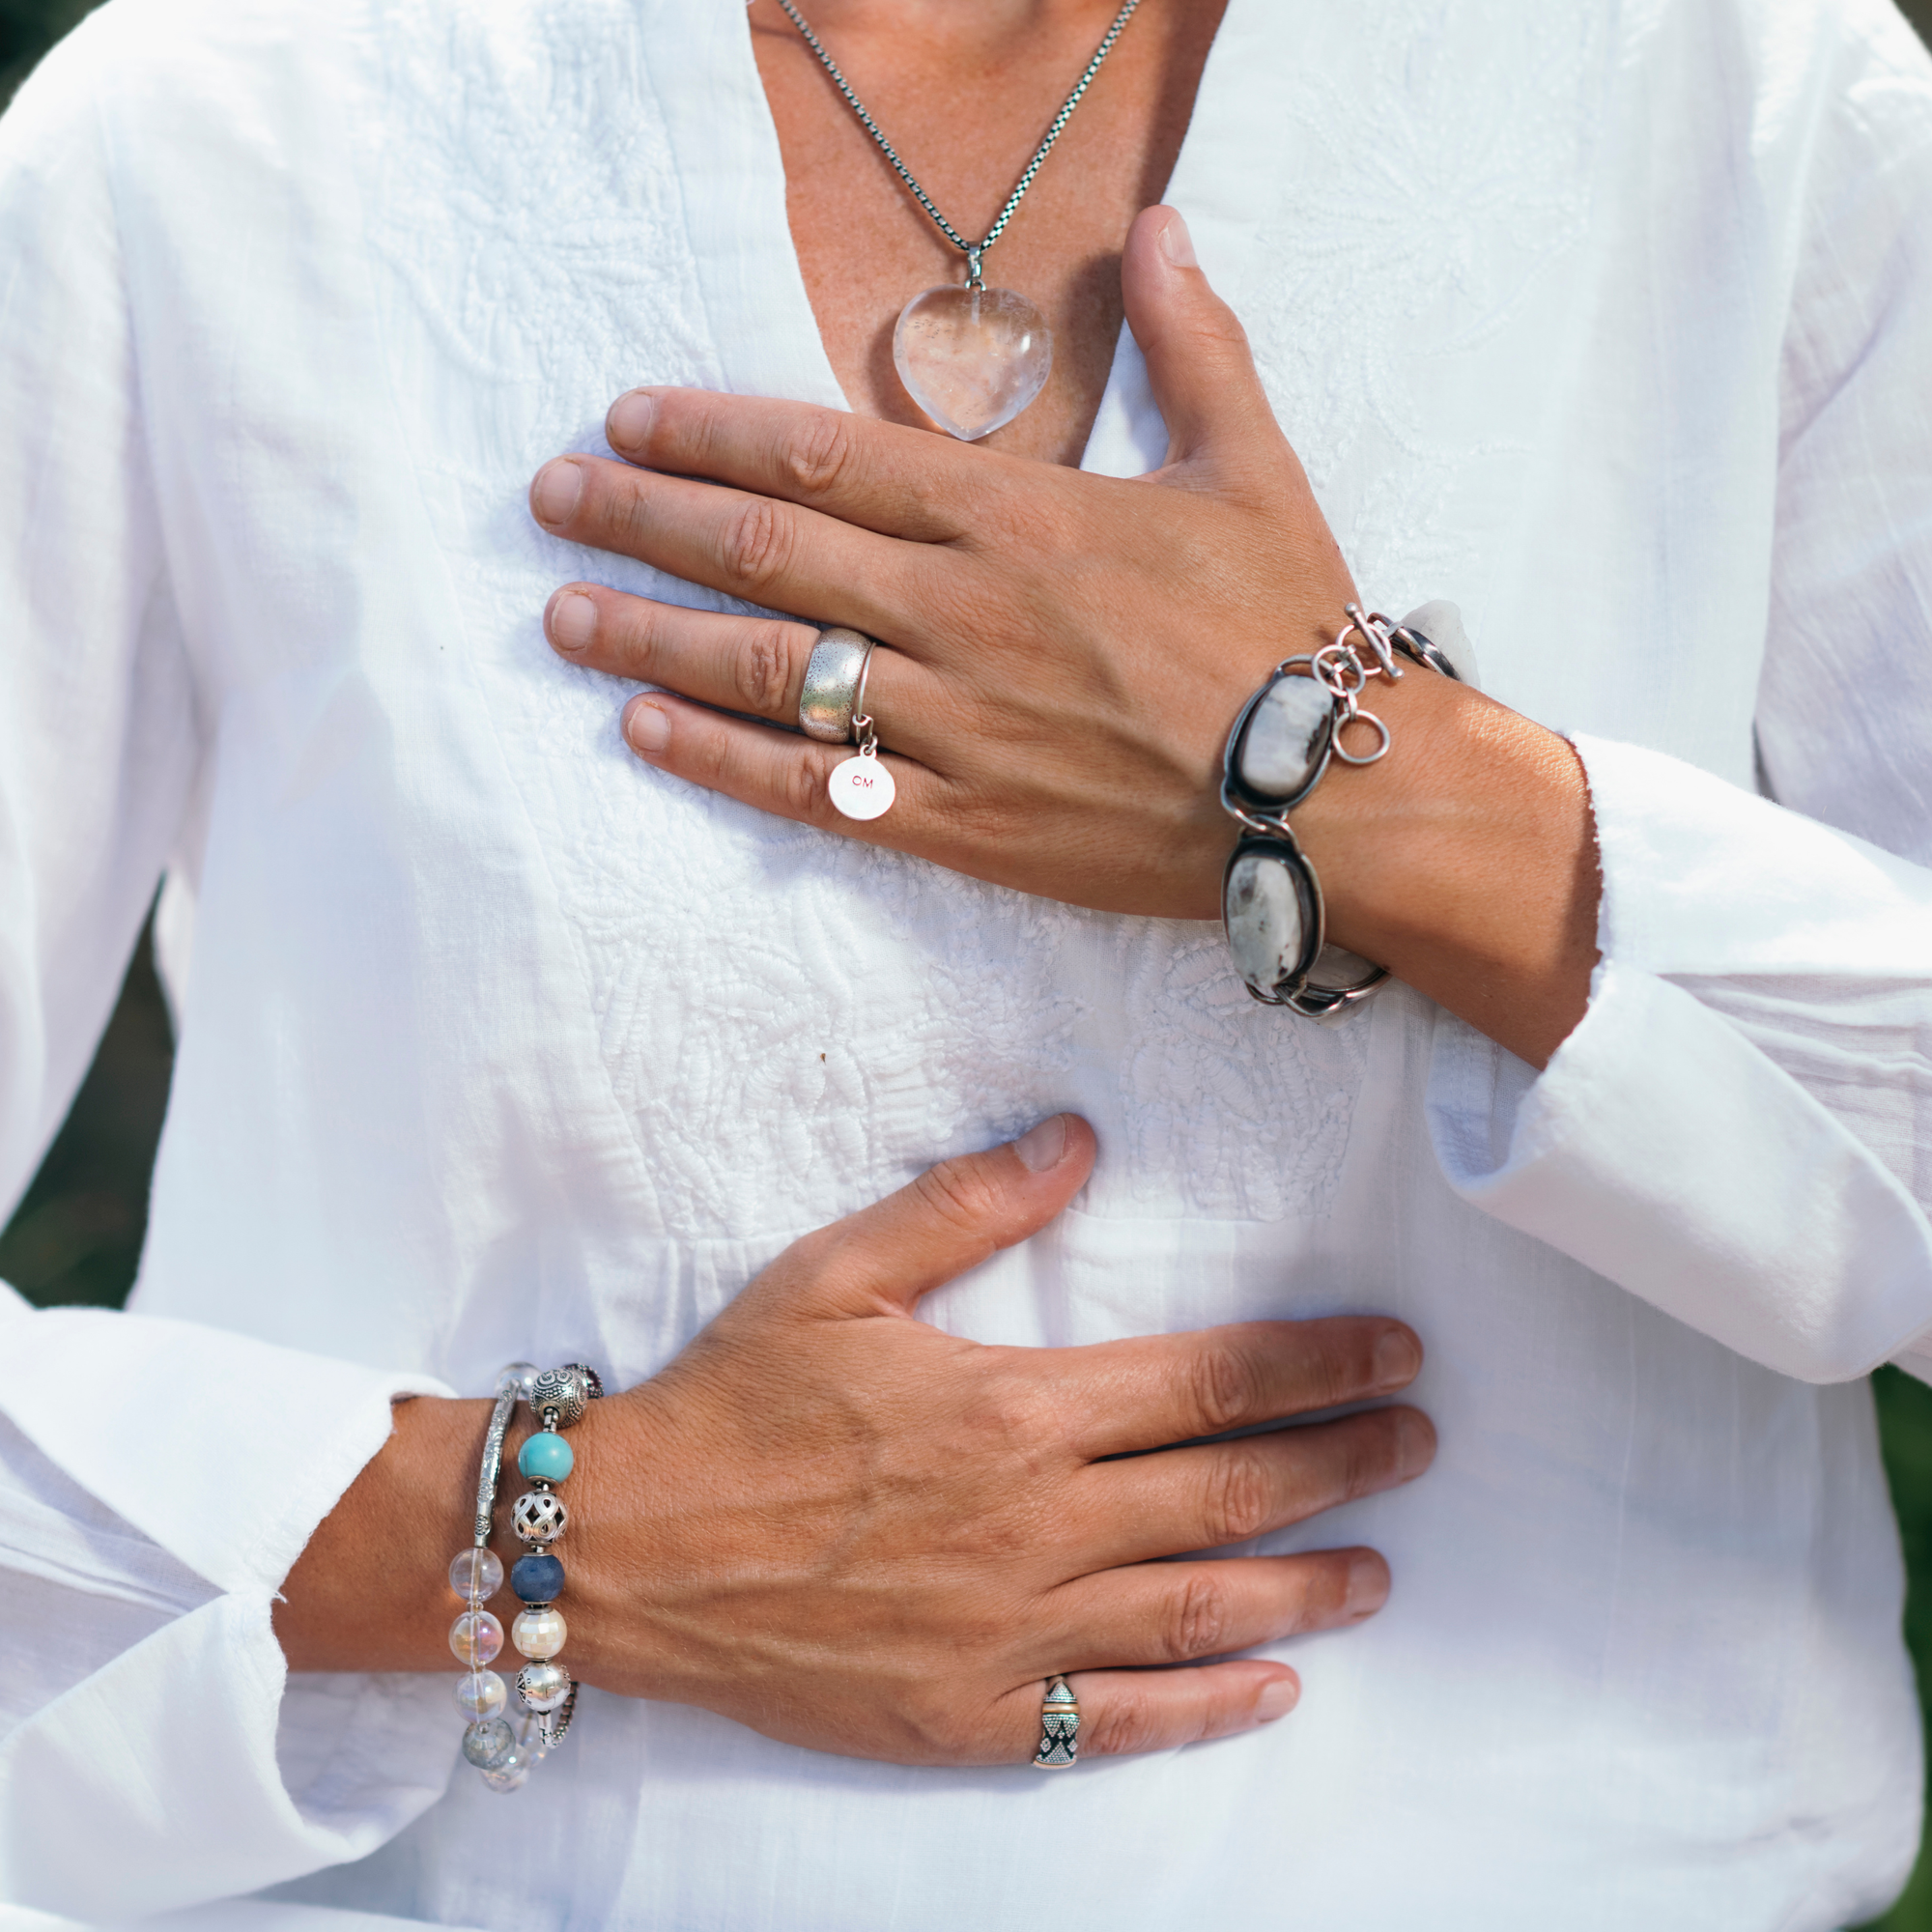 Photo of a woman's hands placed on her heart and stomach in a meditation pose.